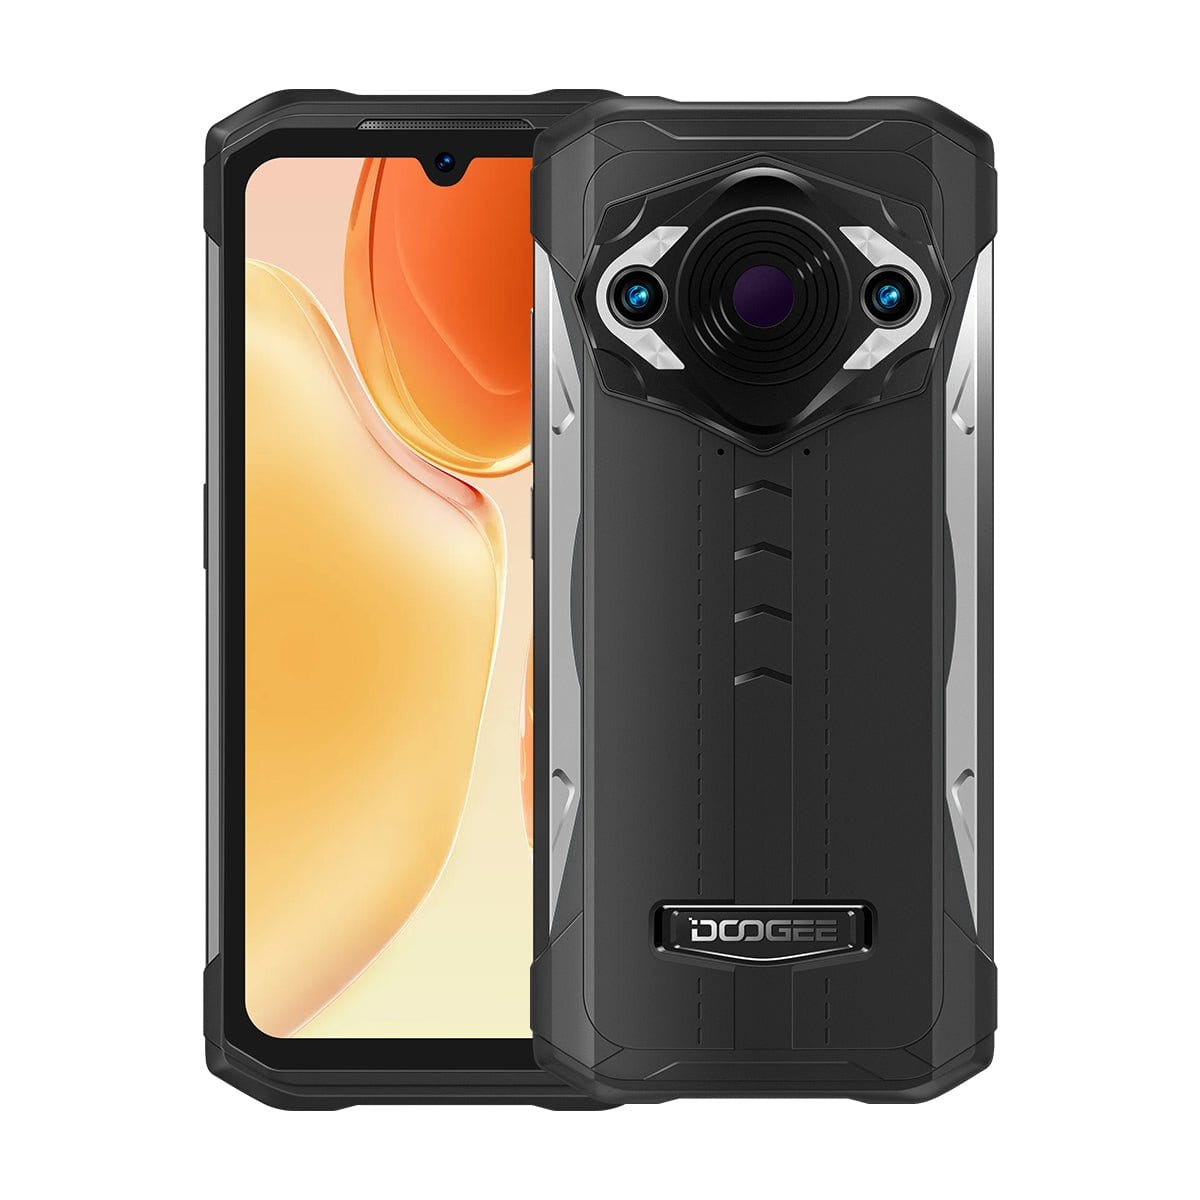 Doogee S98 Pro With Thermal Imaging & Night Vision Is Now Available